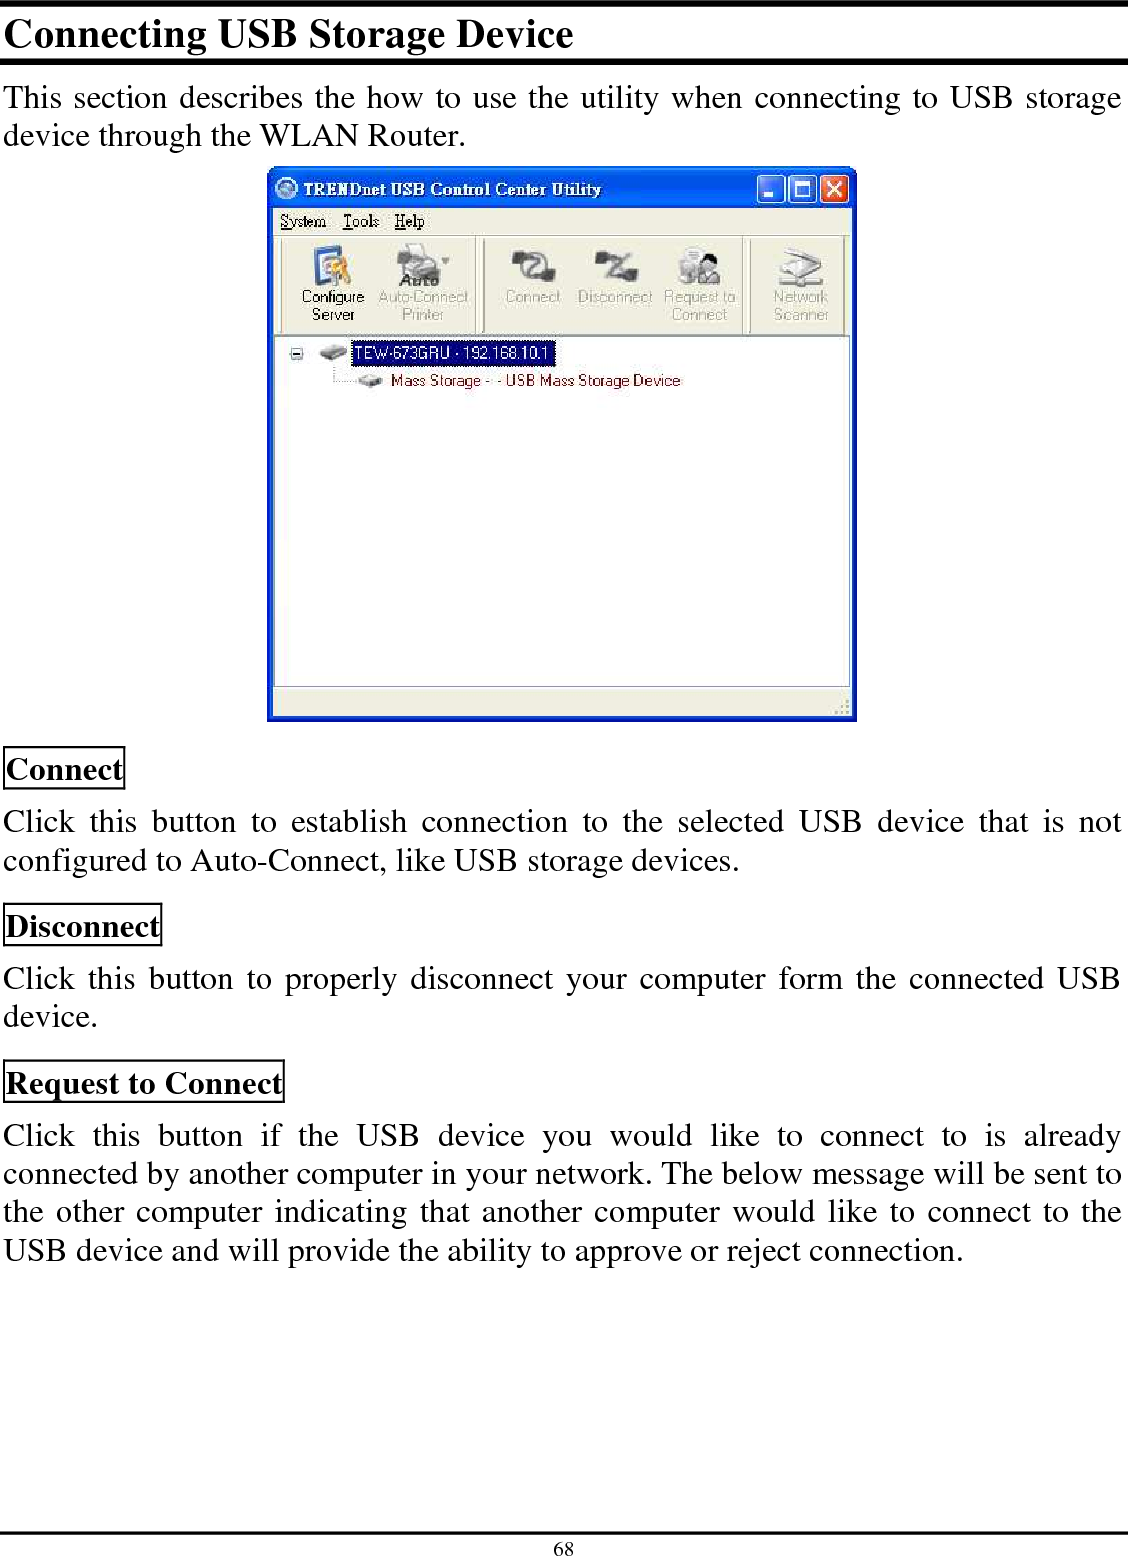 68 Connecting USB Storage Device This section describes the how to use the utility when connecting to USB storage device through the WLAN Router.   Connect Click  this  button  to  establish  connection  to  the  selected  USB  device  that  is  not configured to Auto-Connect, like USB storage devices.  Disconnect Click this button to properly disconnect your computer form the connected USB device.  Request to Connect Click  this  button  if  the  USB  device  you  would  like  to  connect  to  is  already connected by another computer in your network. The below message will be sent to the other computer indicating that another computer would like to connect to the USB device and will provide the ability to approve or reject connection.  